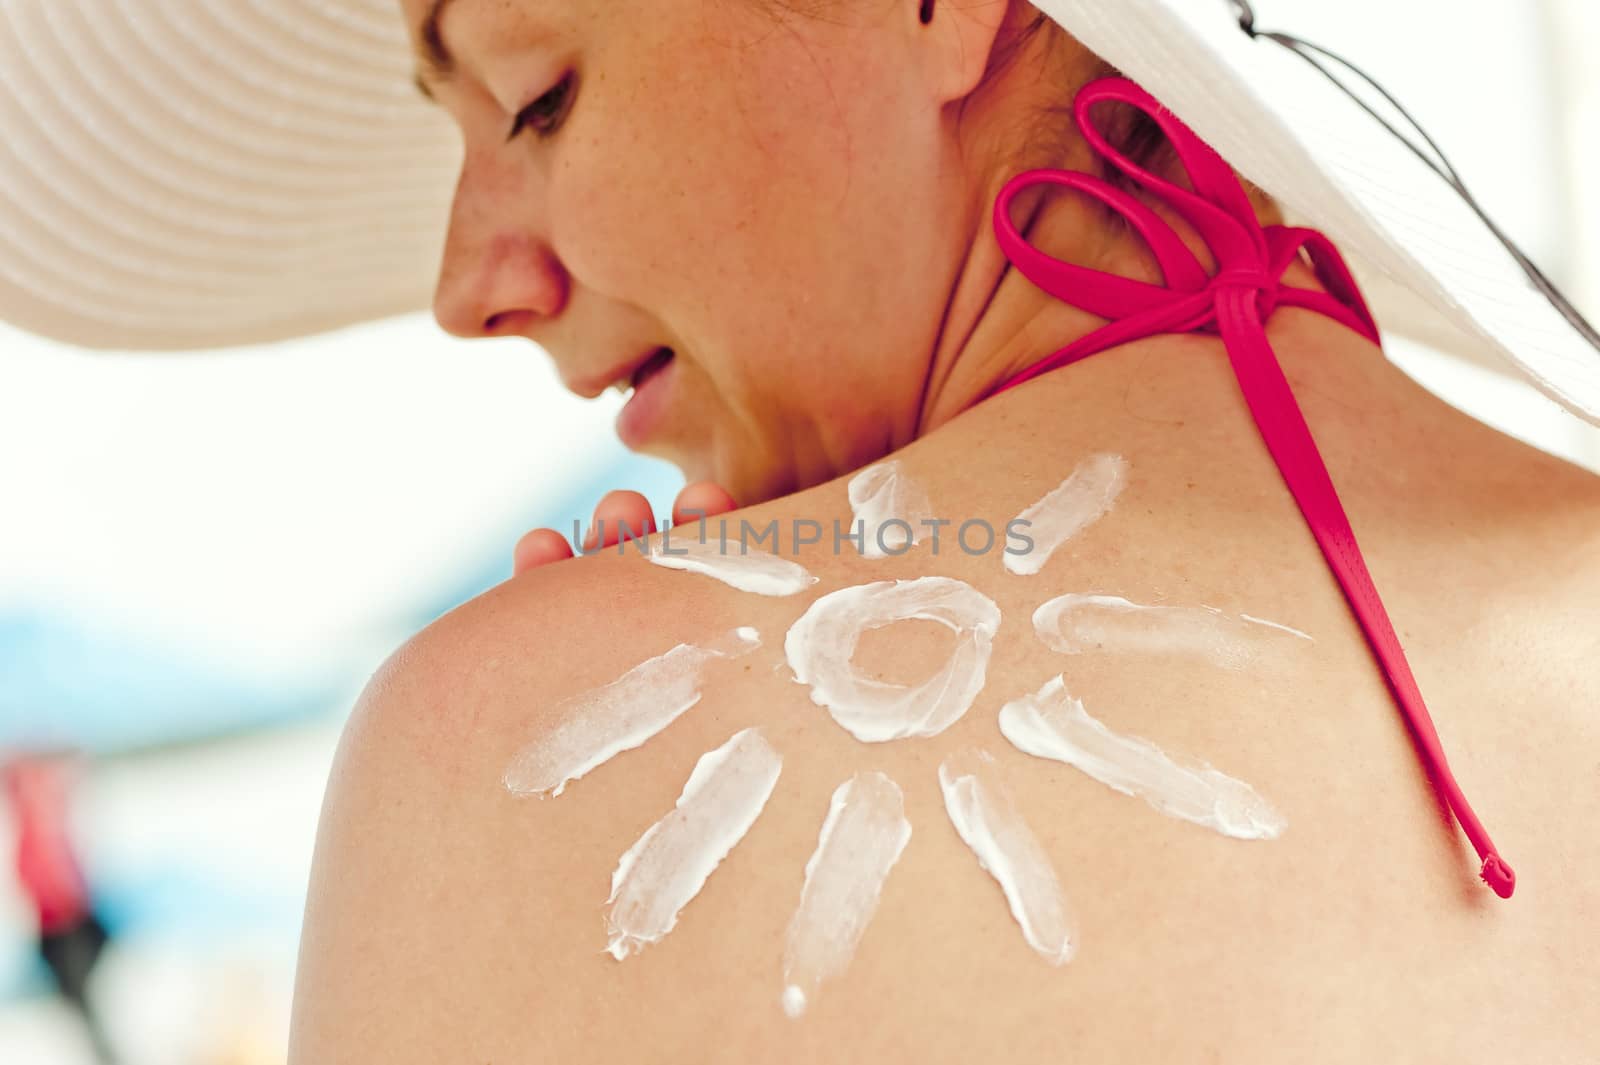 Drawn sun sun cream on his shoulder a beautiful young woman by kosmsos111